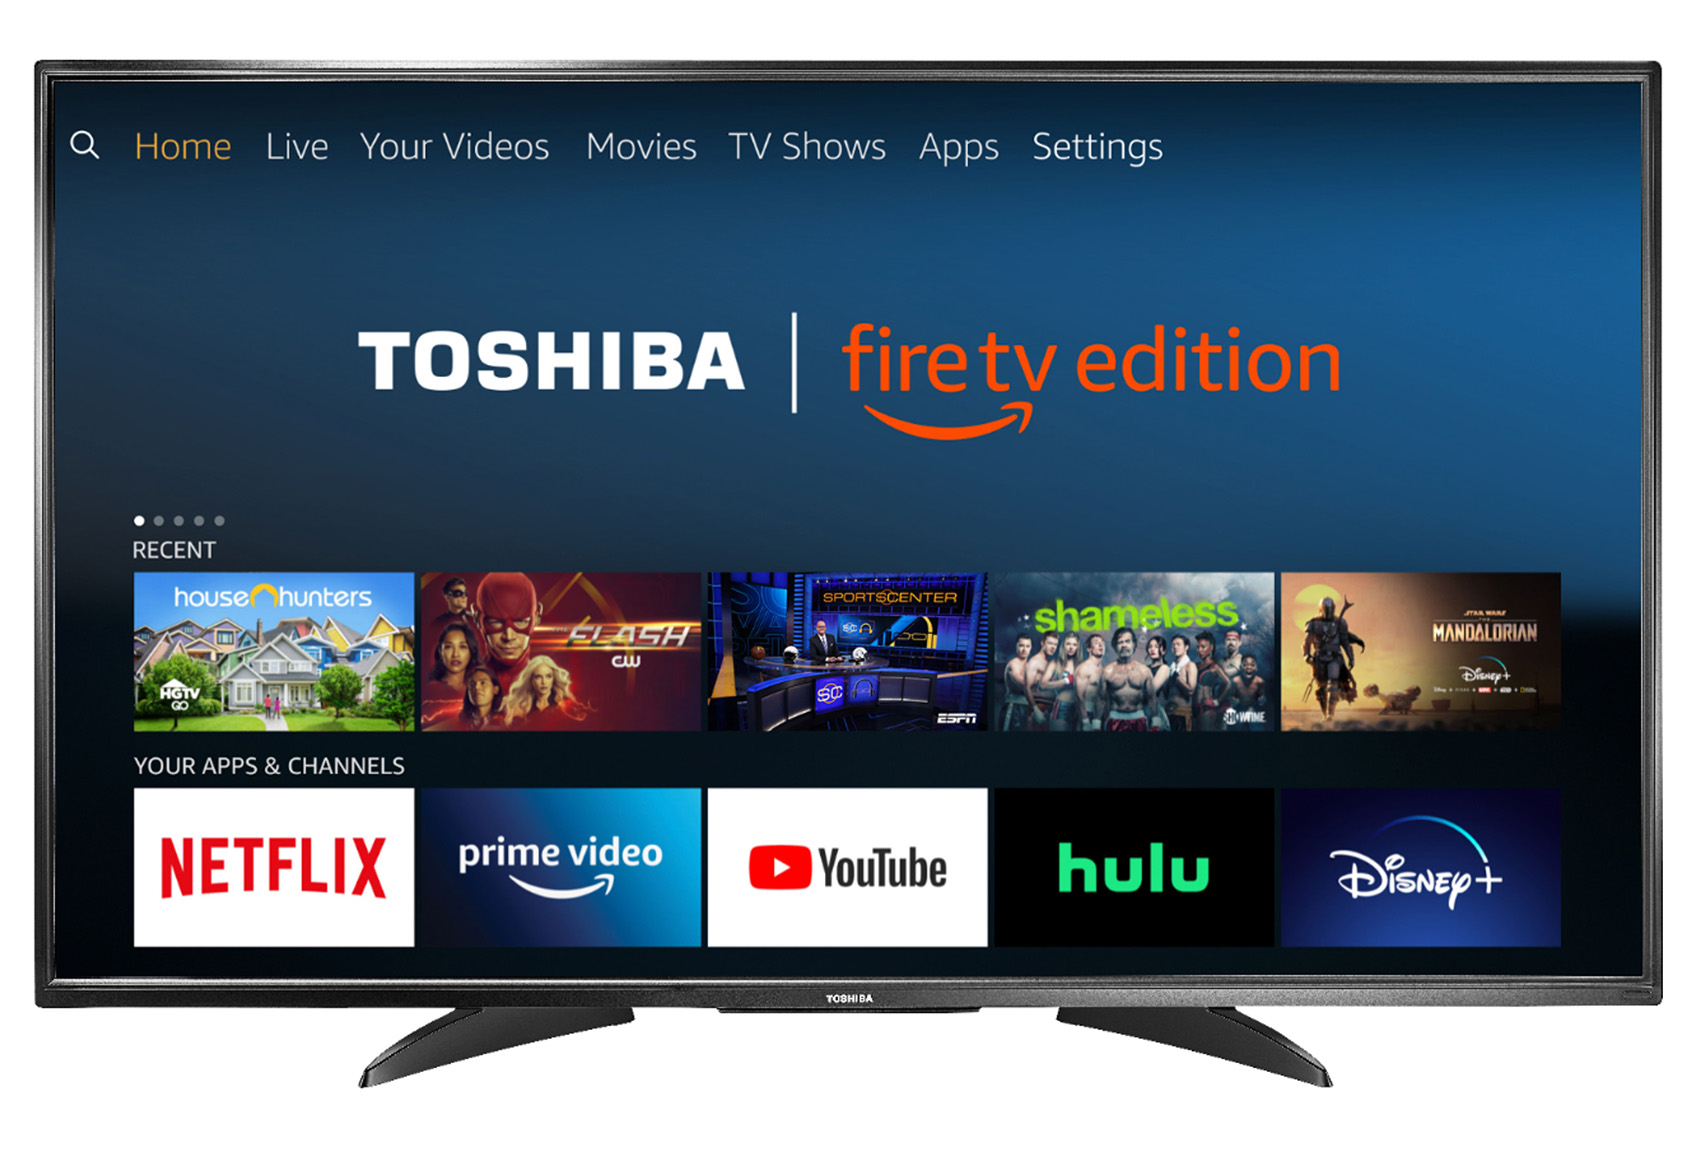 how to reset Toshiba TV banner 4.0